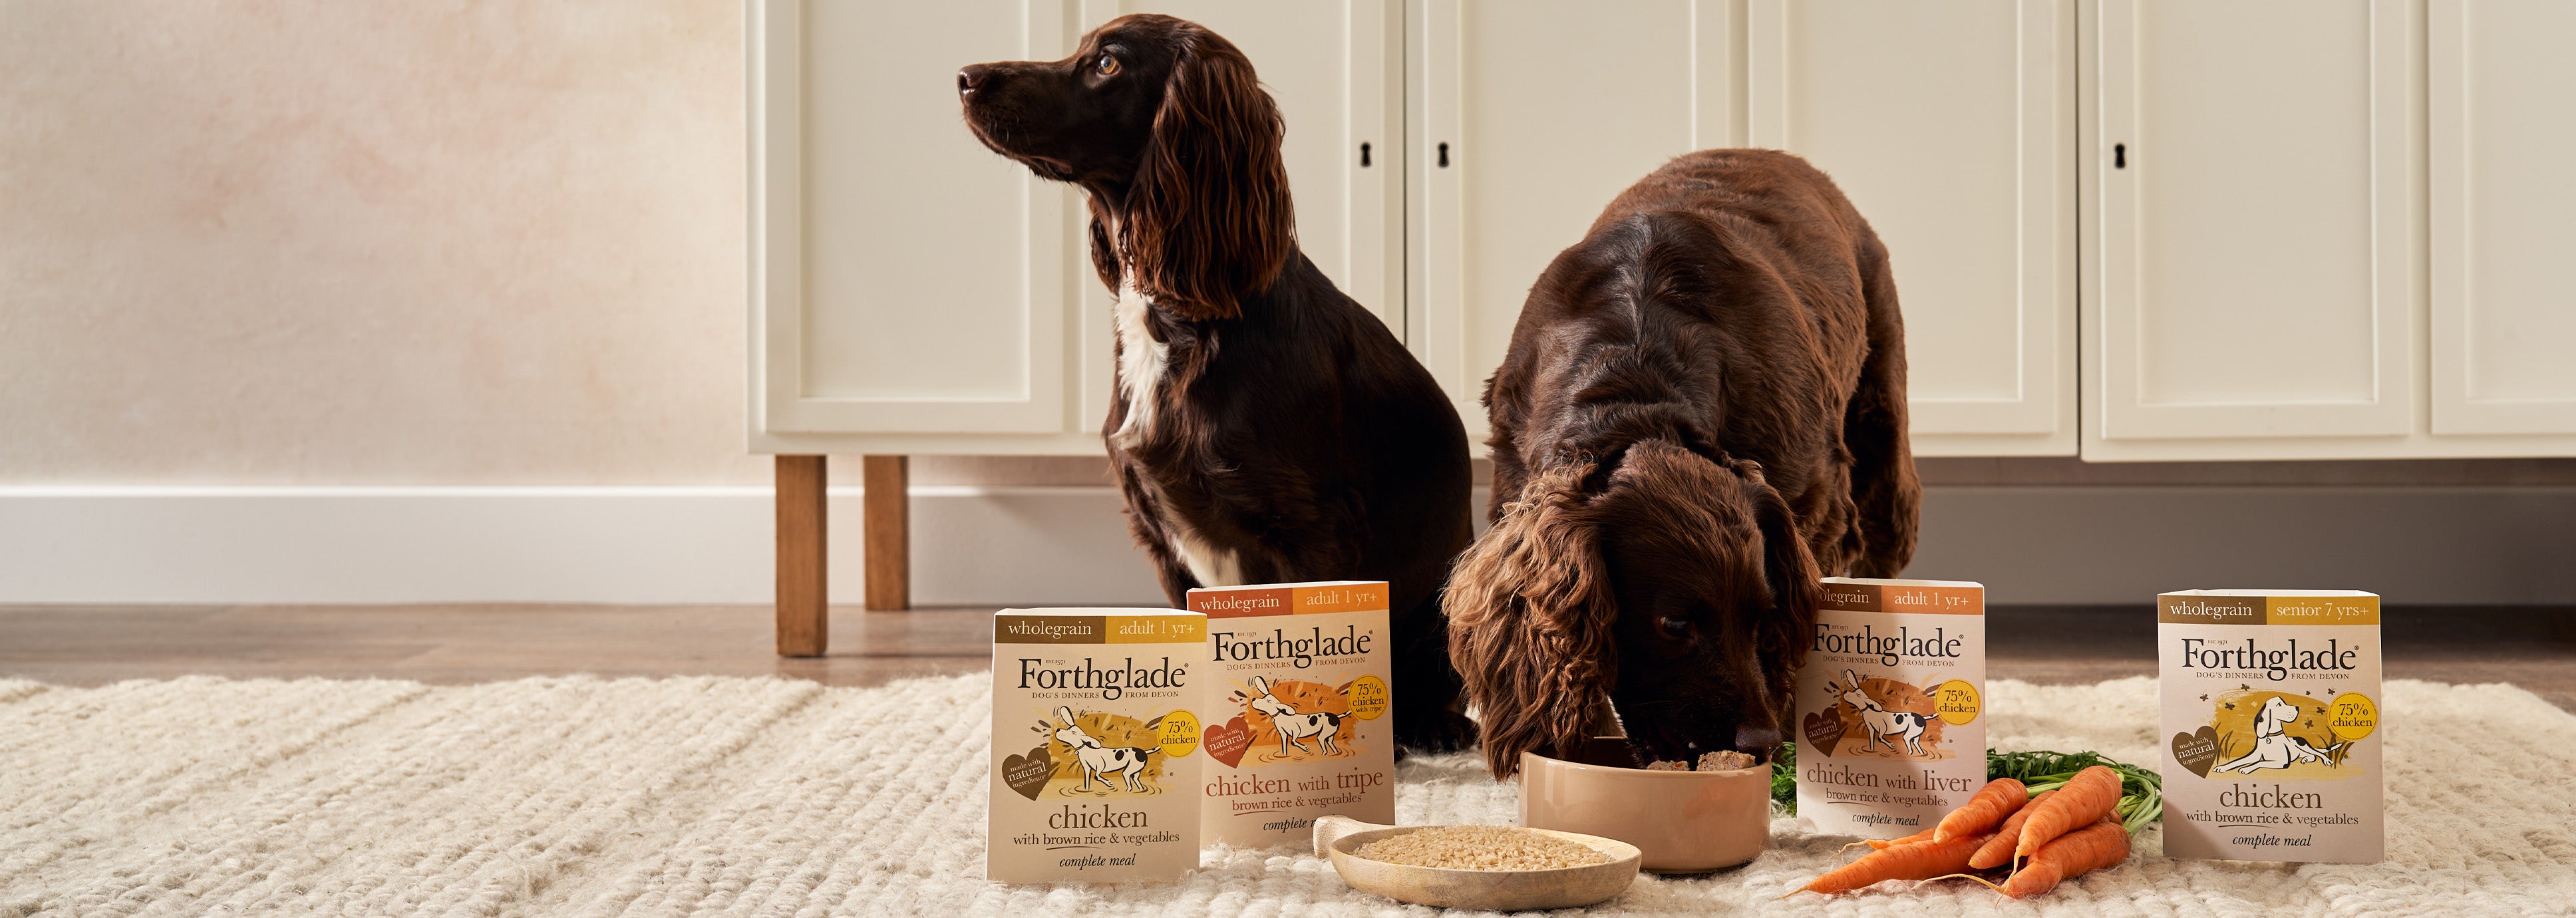 Two dogs eating from a bowl and sitting next to Forthglade wet food trays